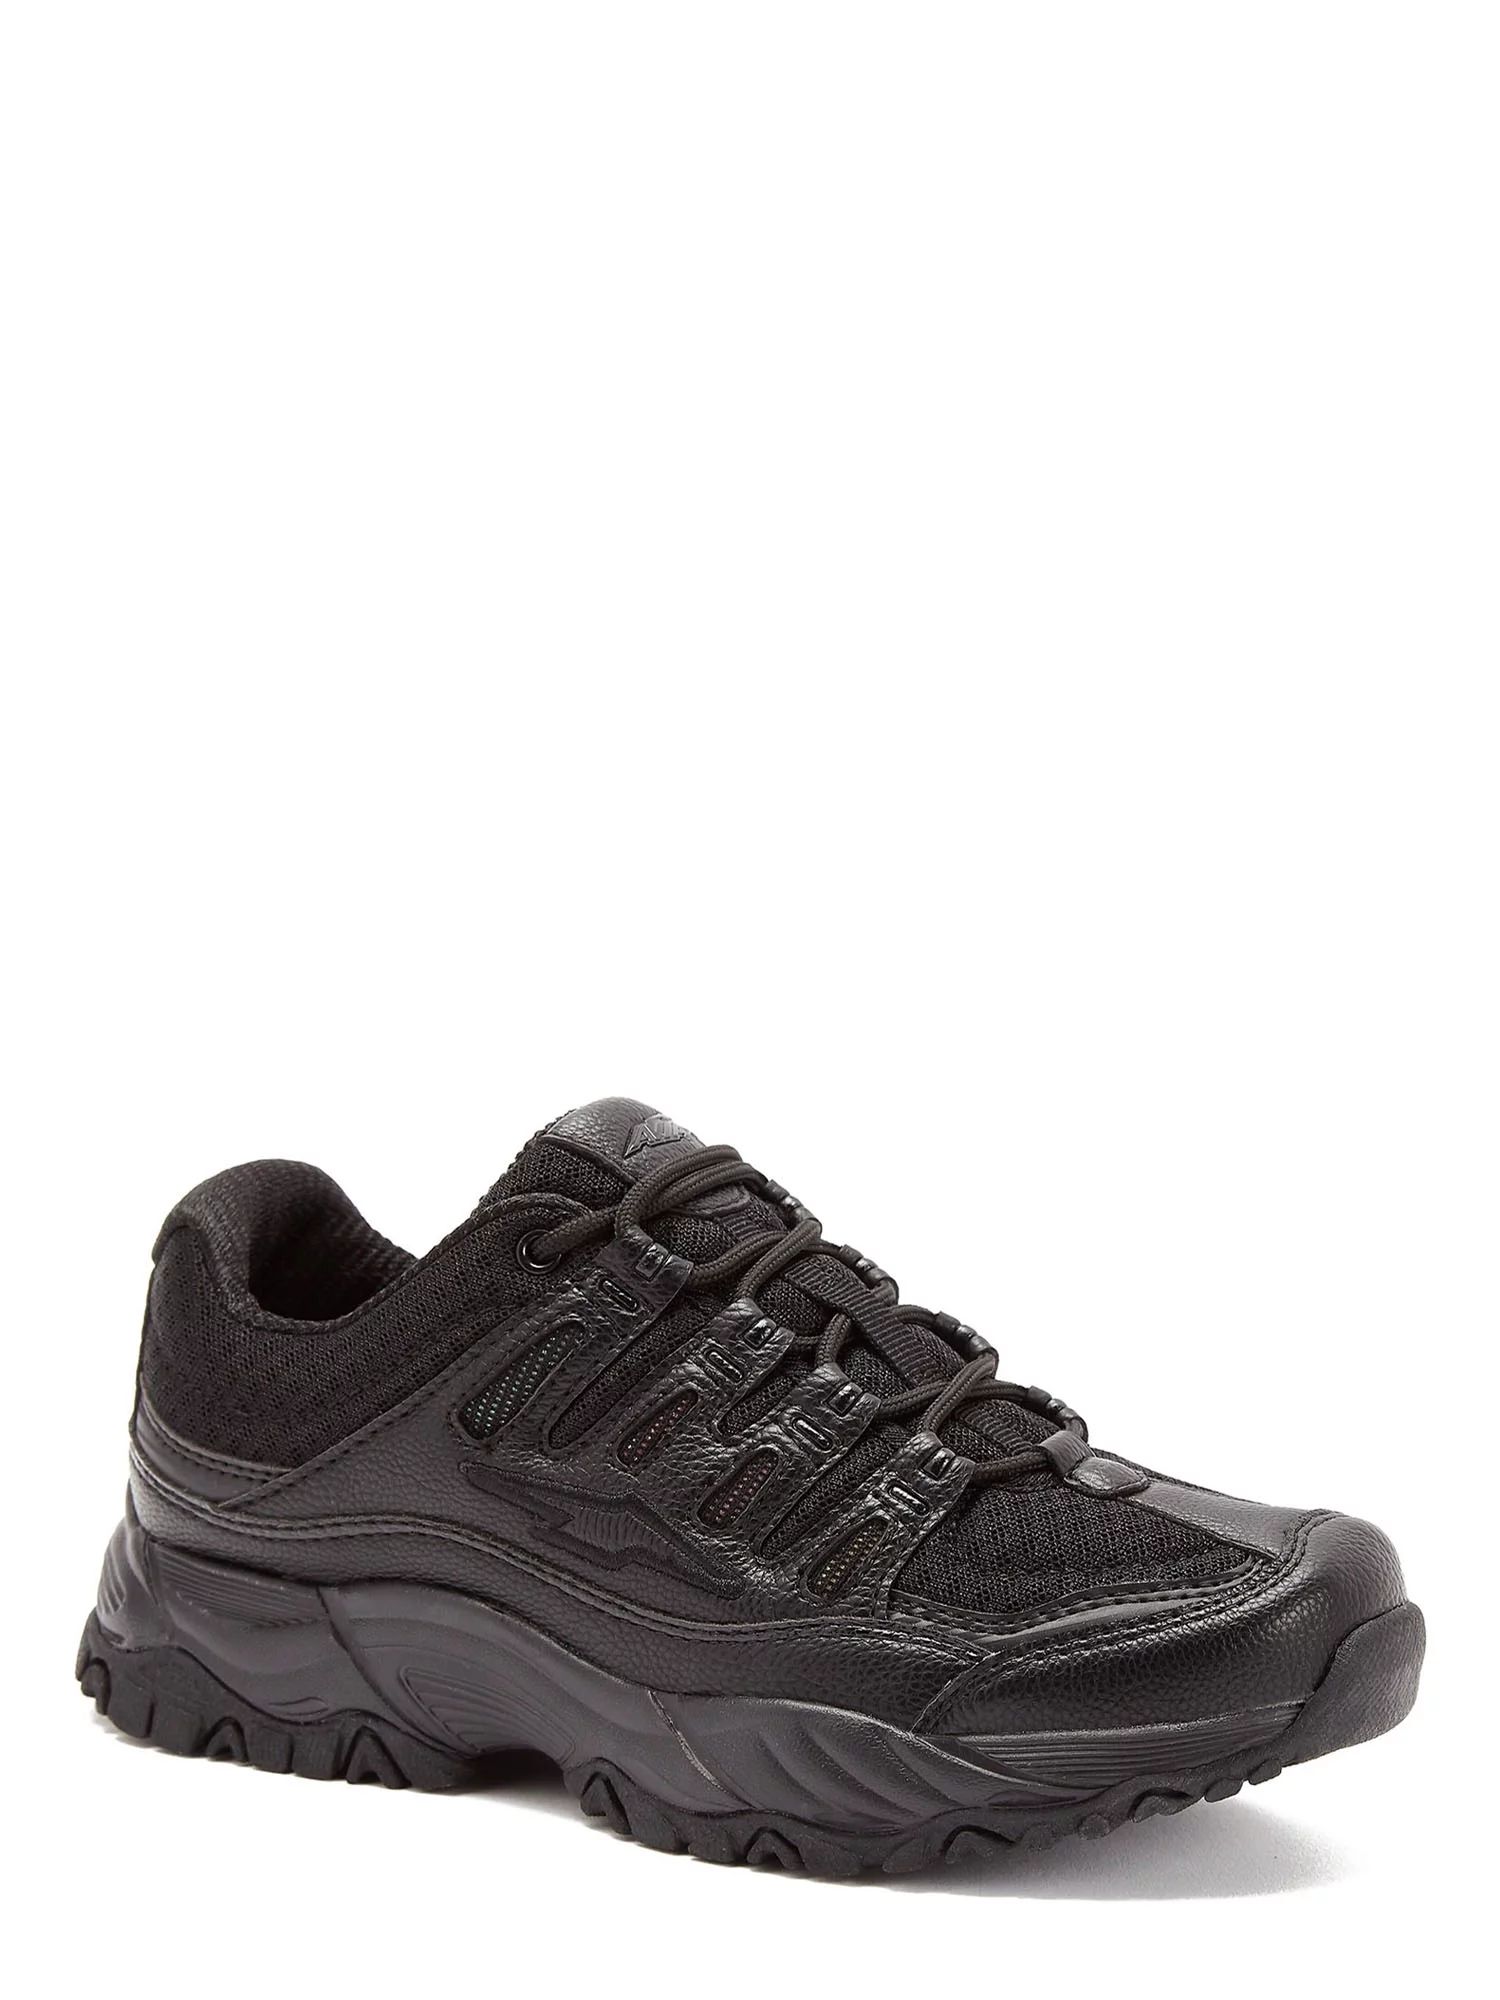 Avia Women's Elevate Athletic Sneakers, Wide Width Available | Walmart (US)